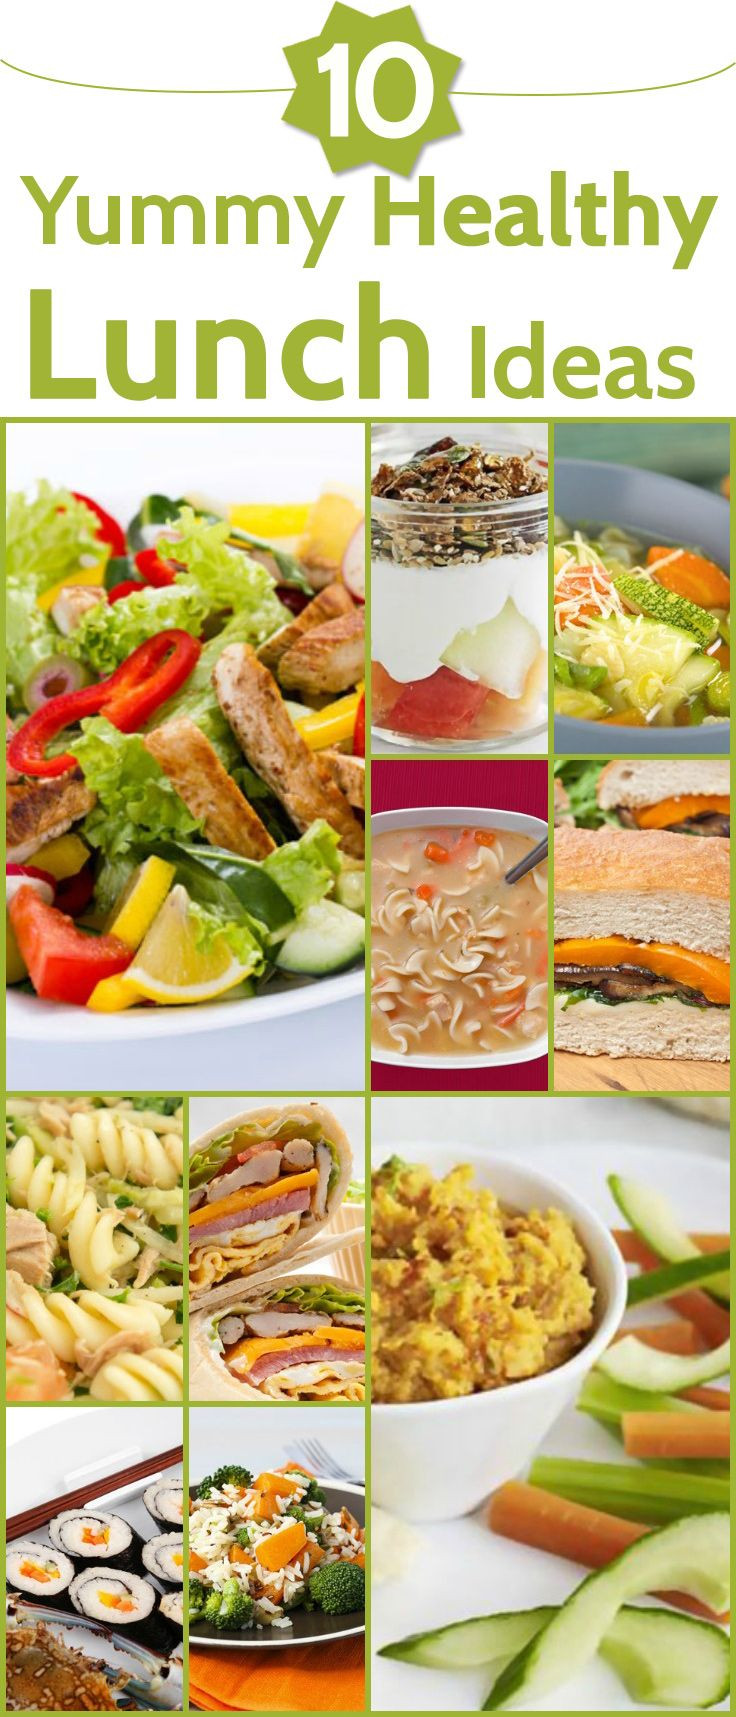 Yummy Healthy Lunches
 17 Best images about Lunch ideas hool lunch etc on